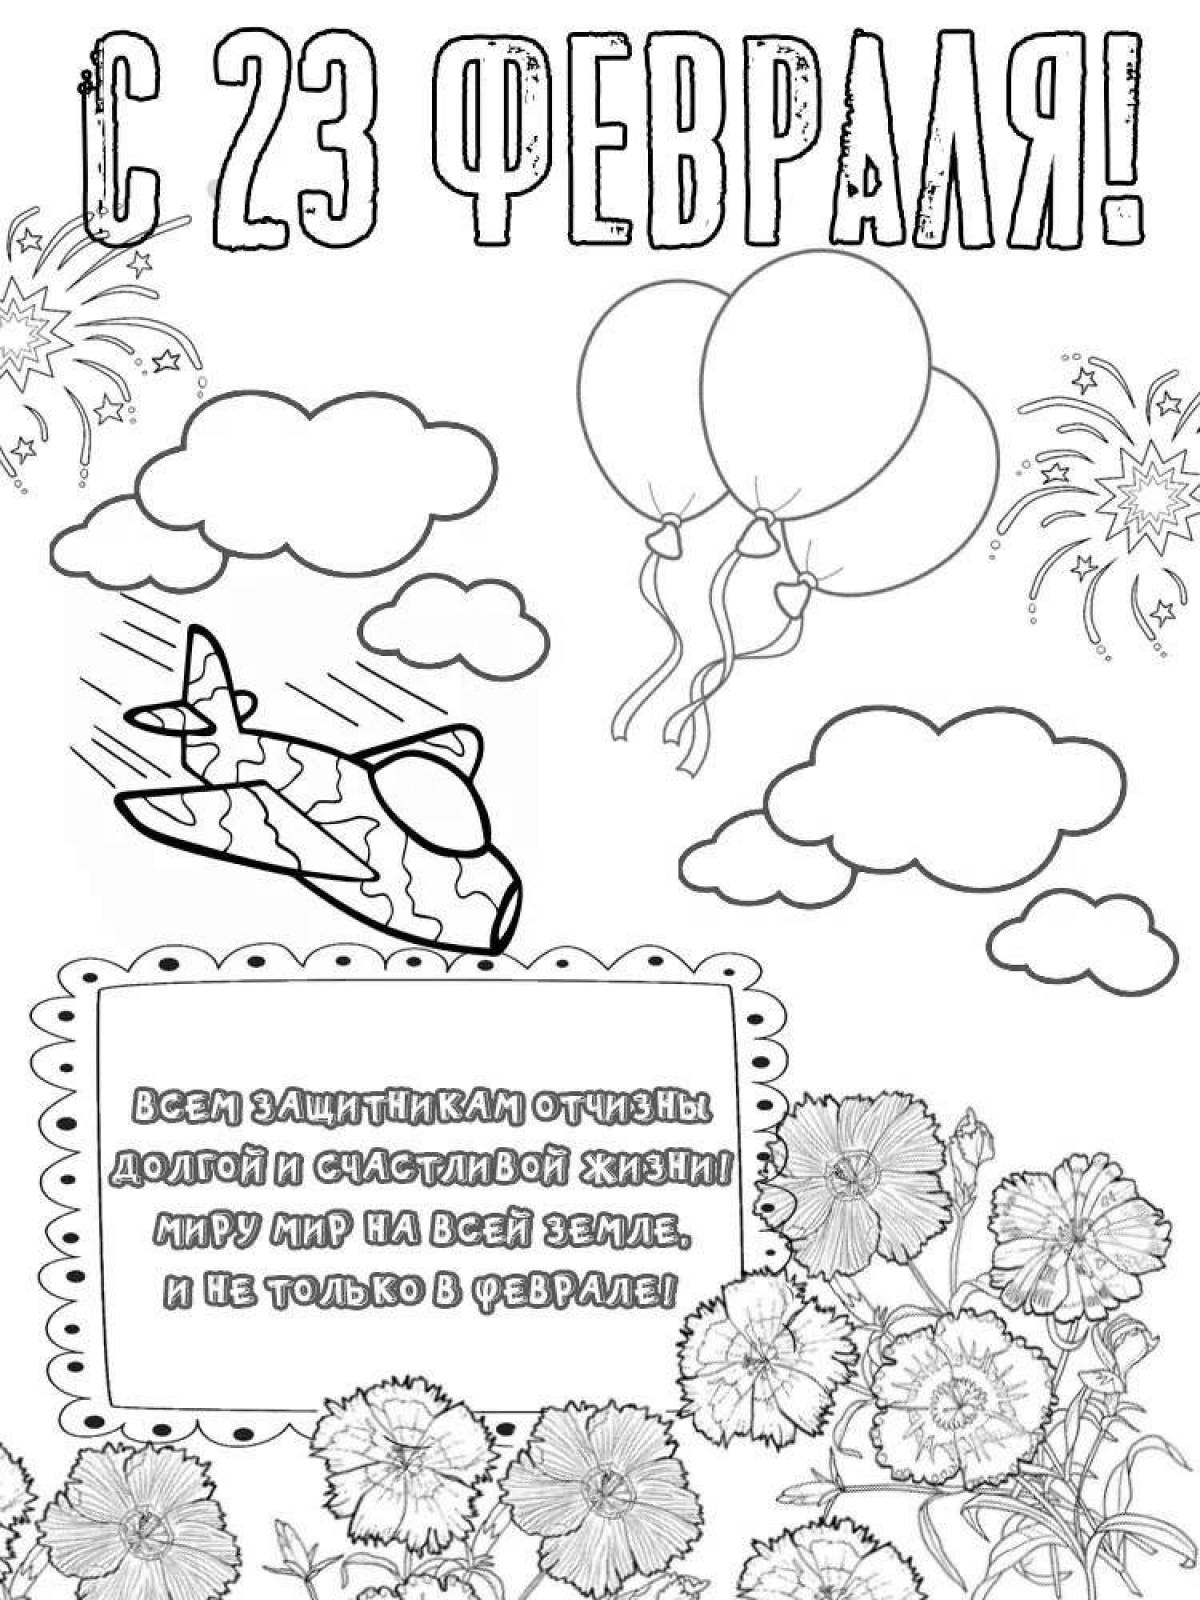 Coloring page magical school theme February 23